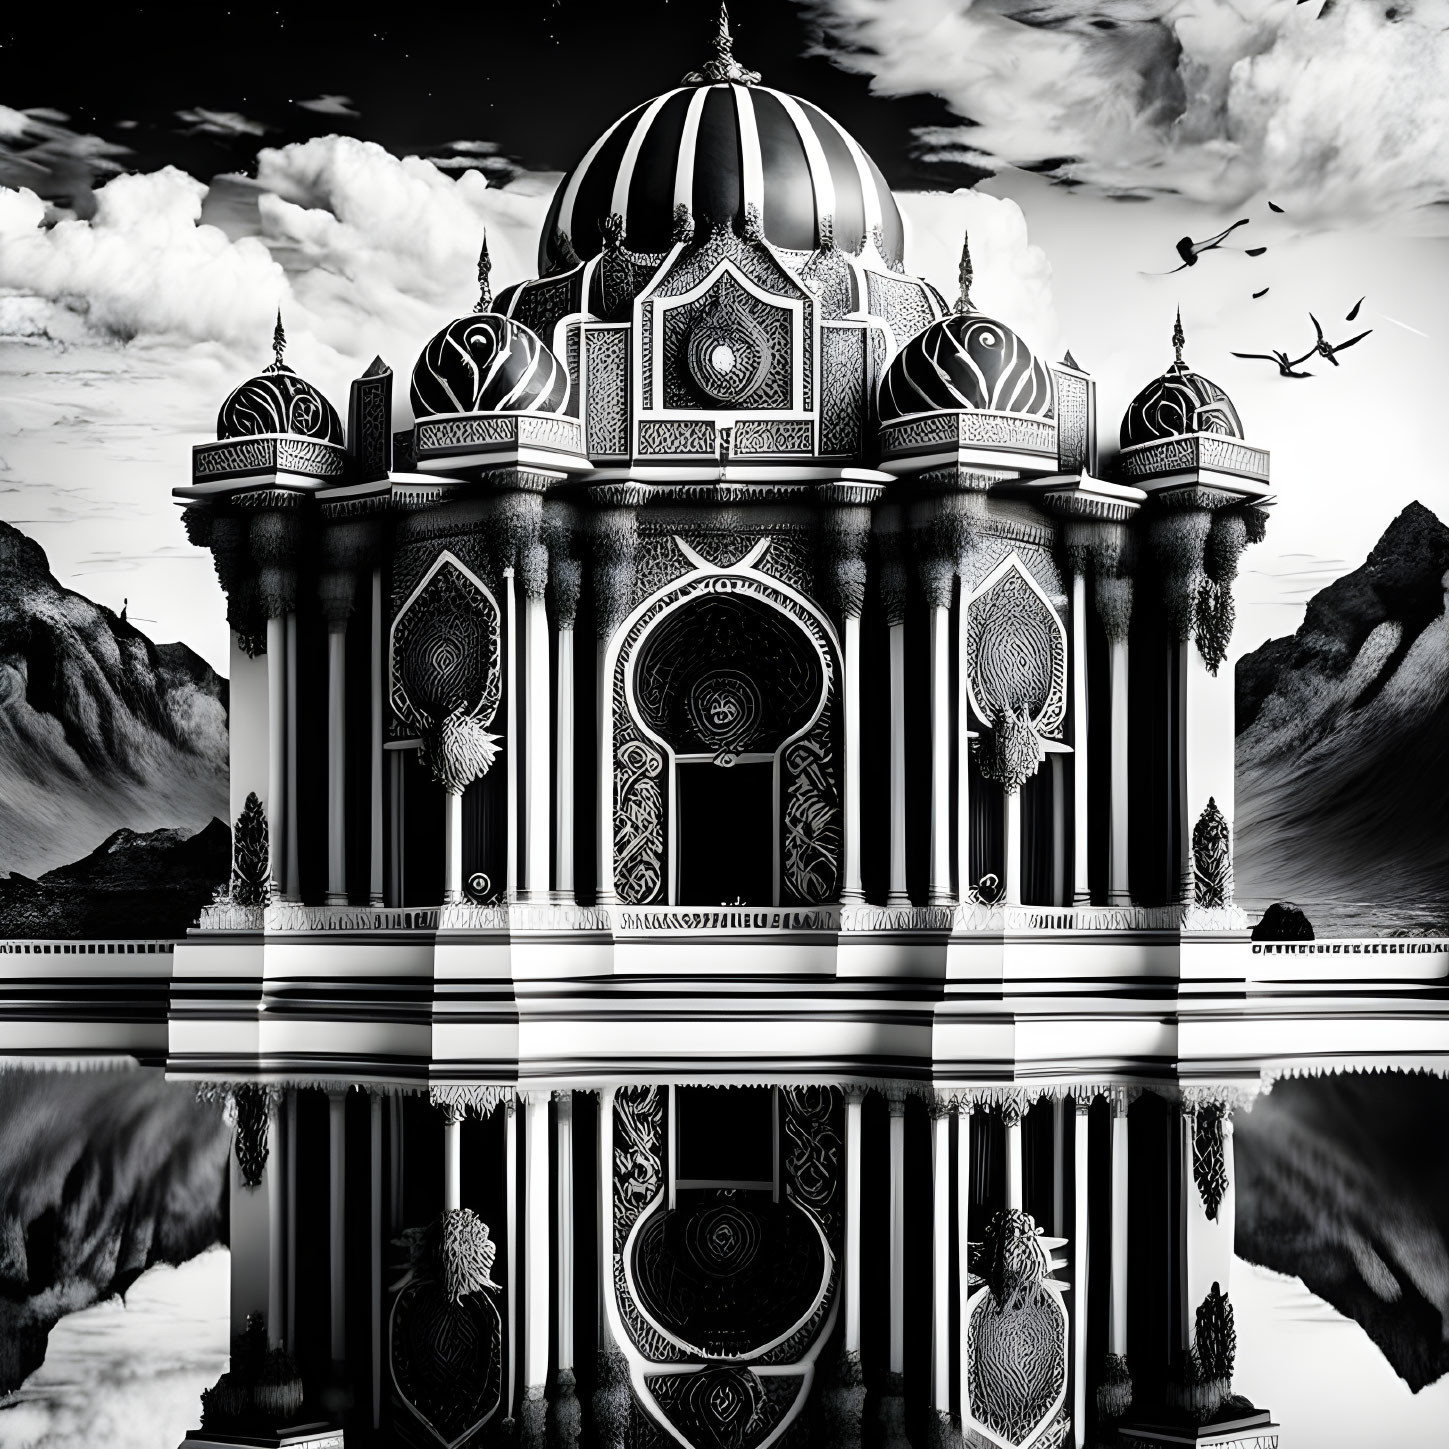 Monochrome image of intricate mosque reflected in water, with clouds and mountains.